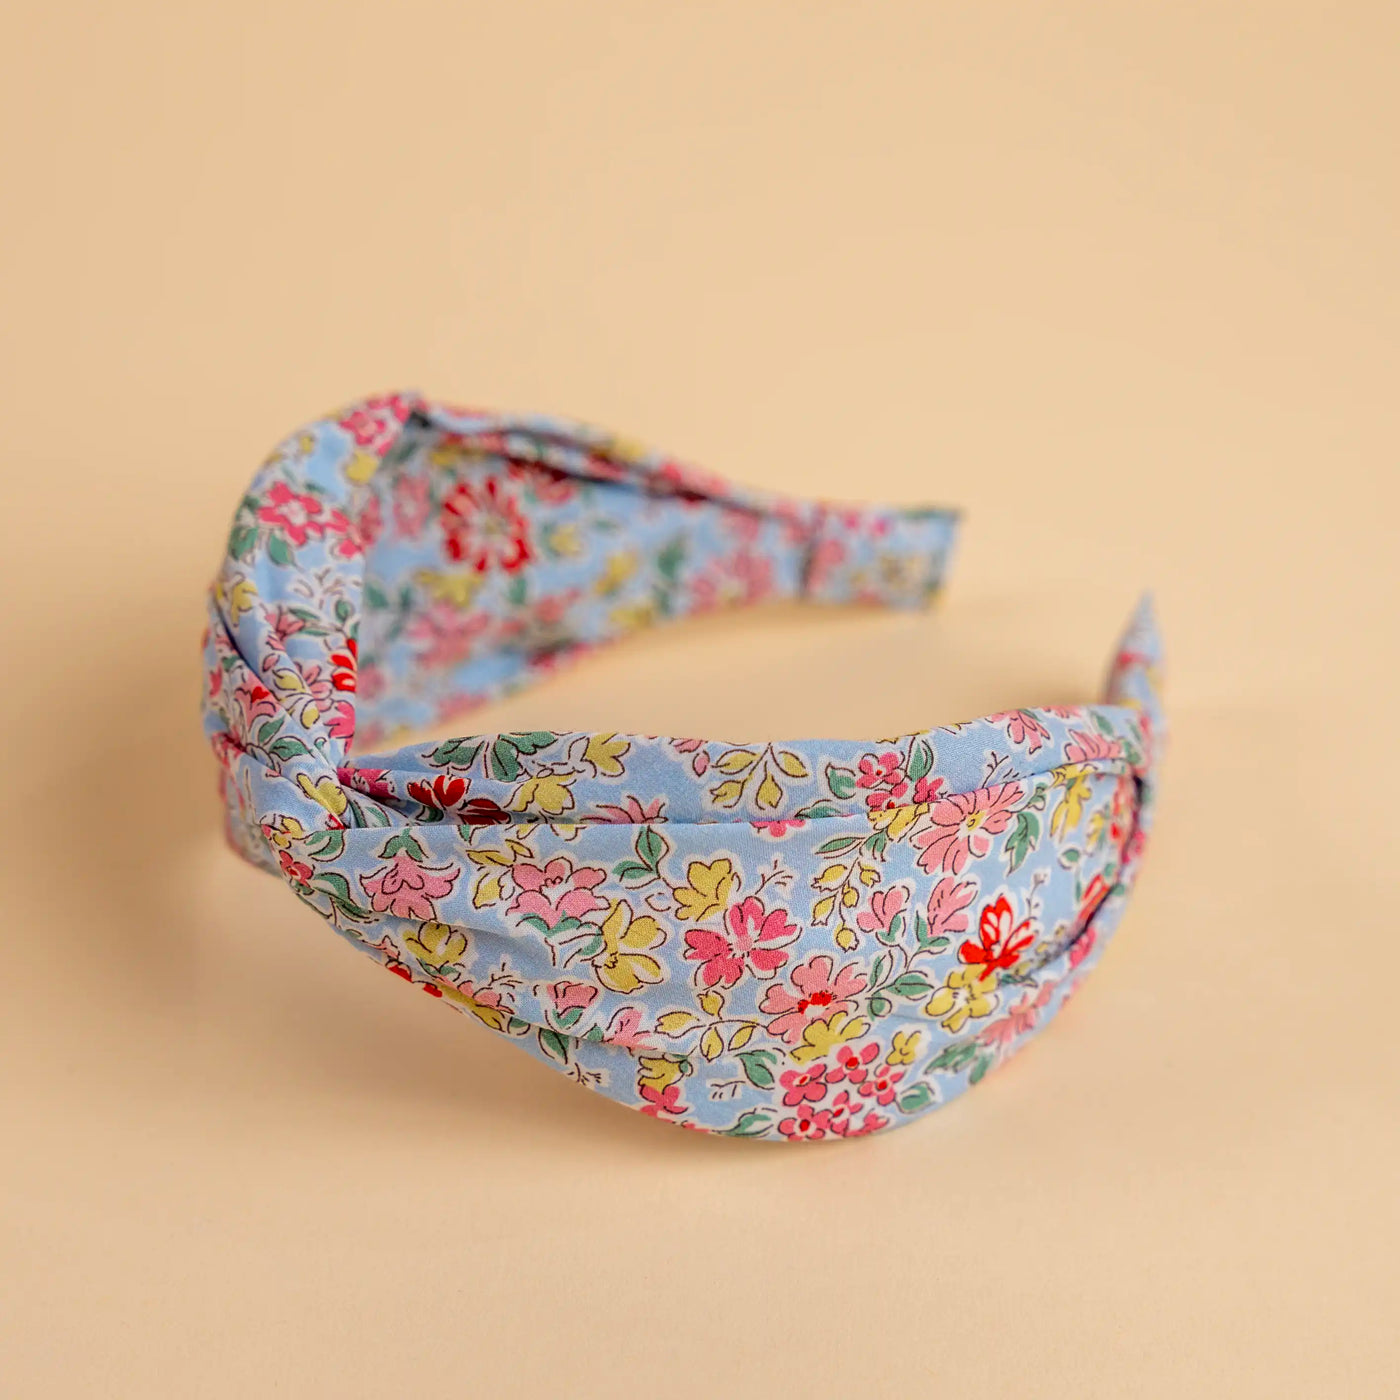 Lucys Light Blue Poppy Floral Headband. Light blue background with pink, yellow, and red flowers. Side view.